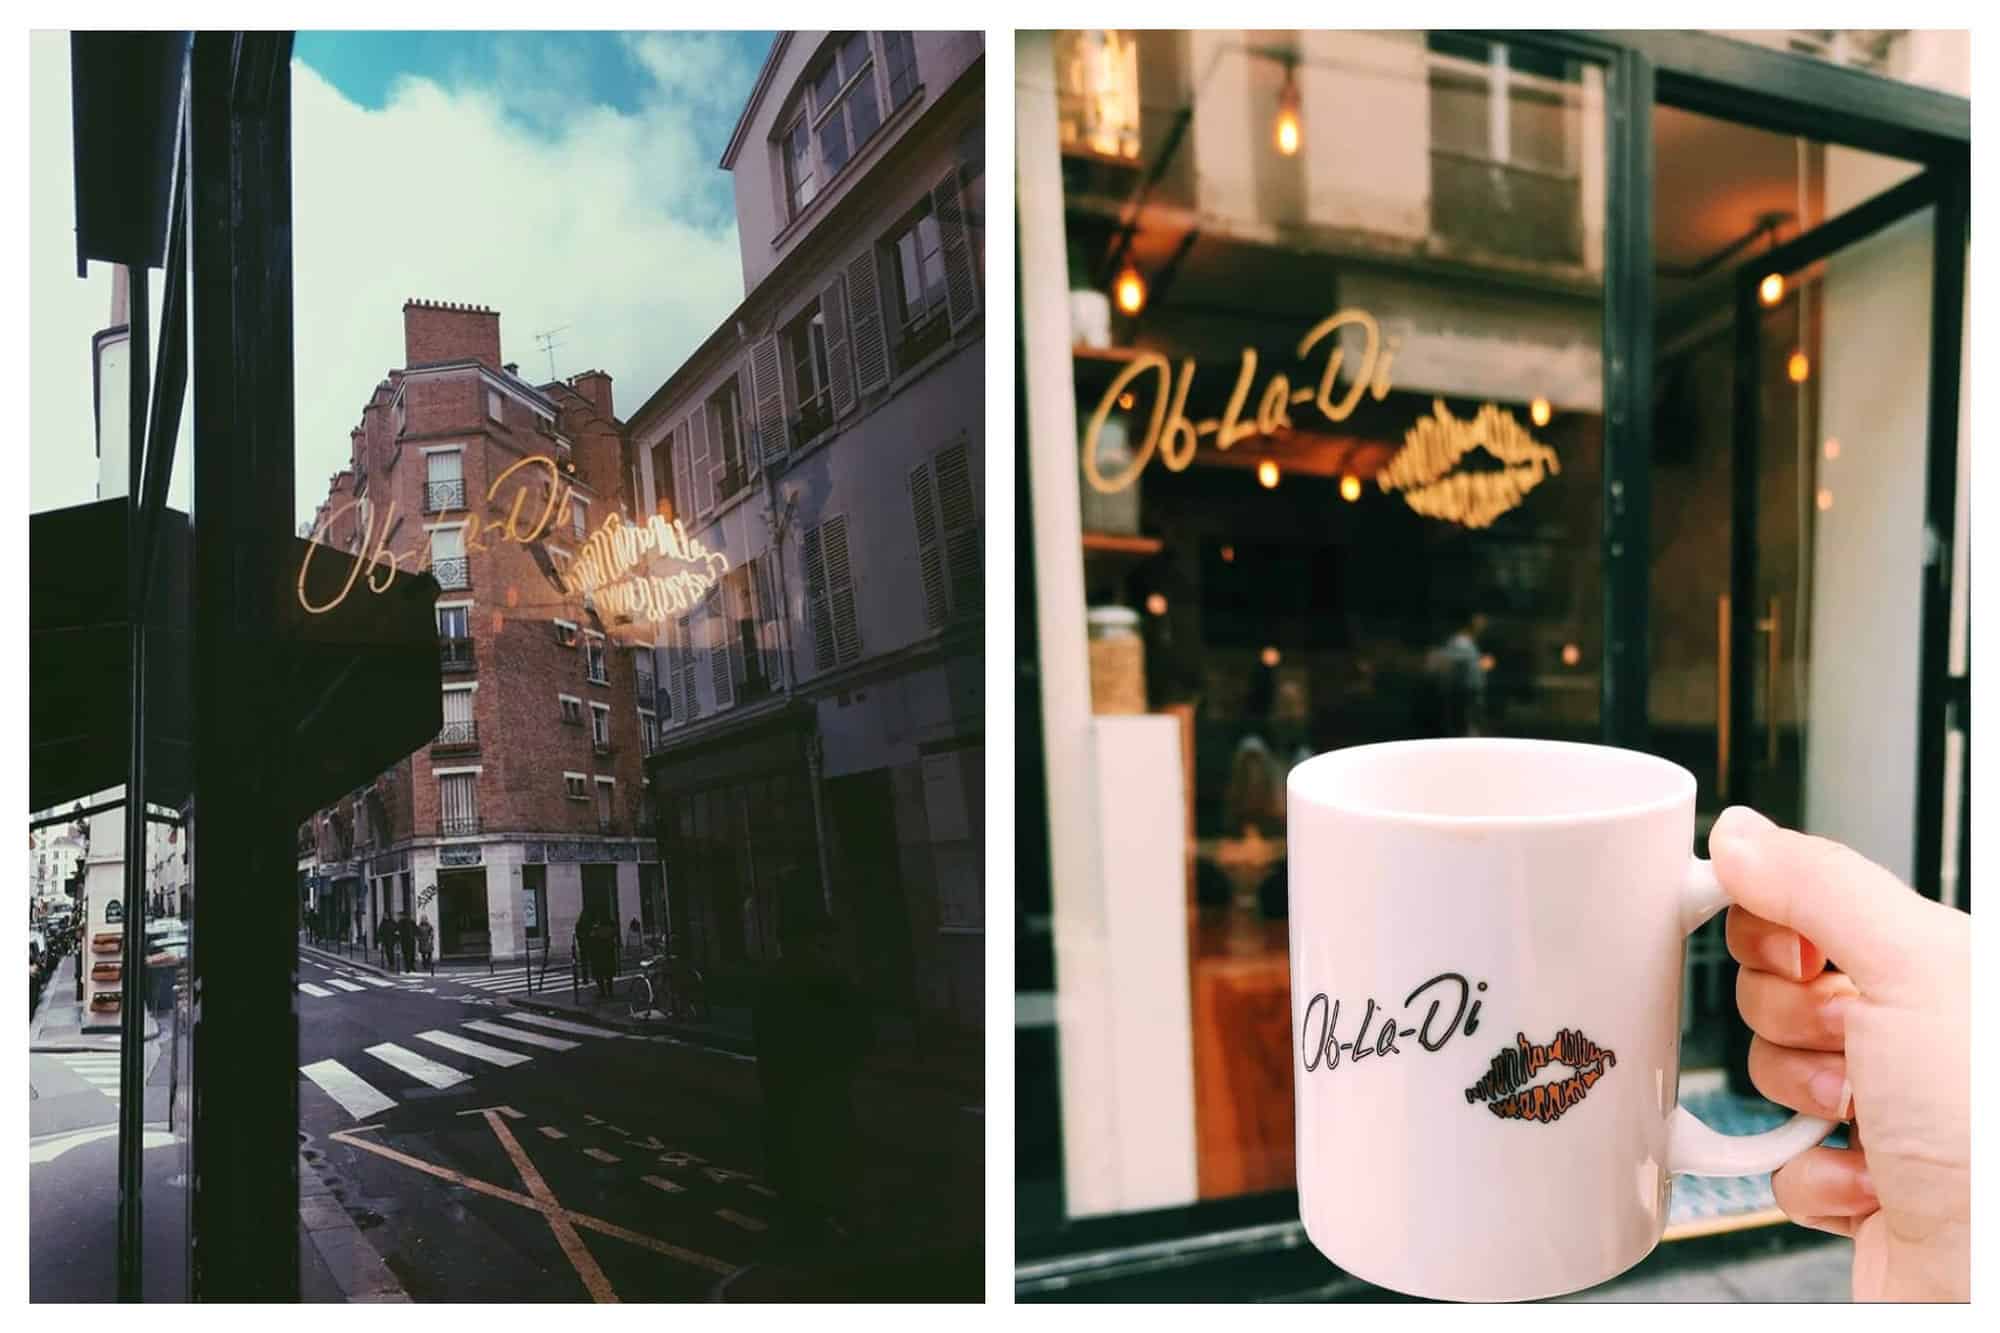 Left: A photo of the store front at Ob-La-Di cafe in Paris, reflecting onto the Paris street behind. Right: a photo of someone holding a white Ob-La Di coffee mug outside the Ob-La-Di coffee shop in Paris. 